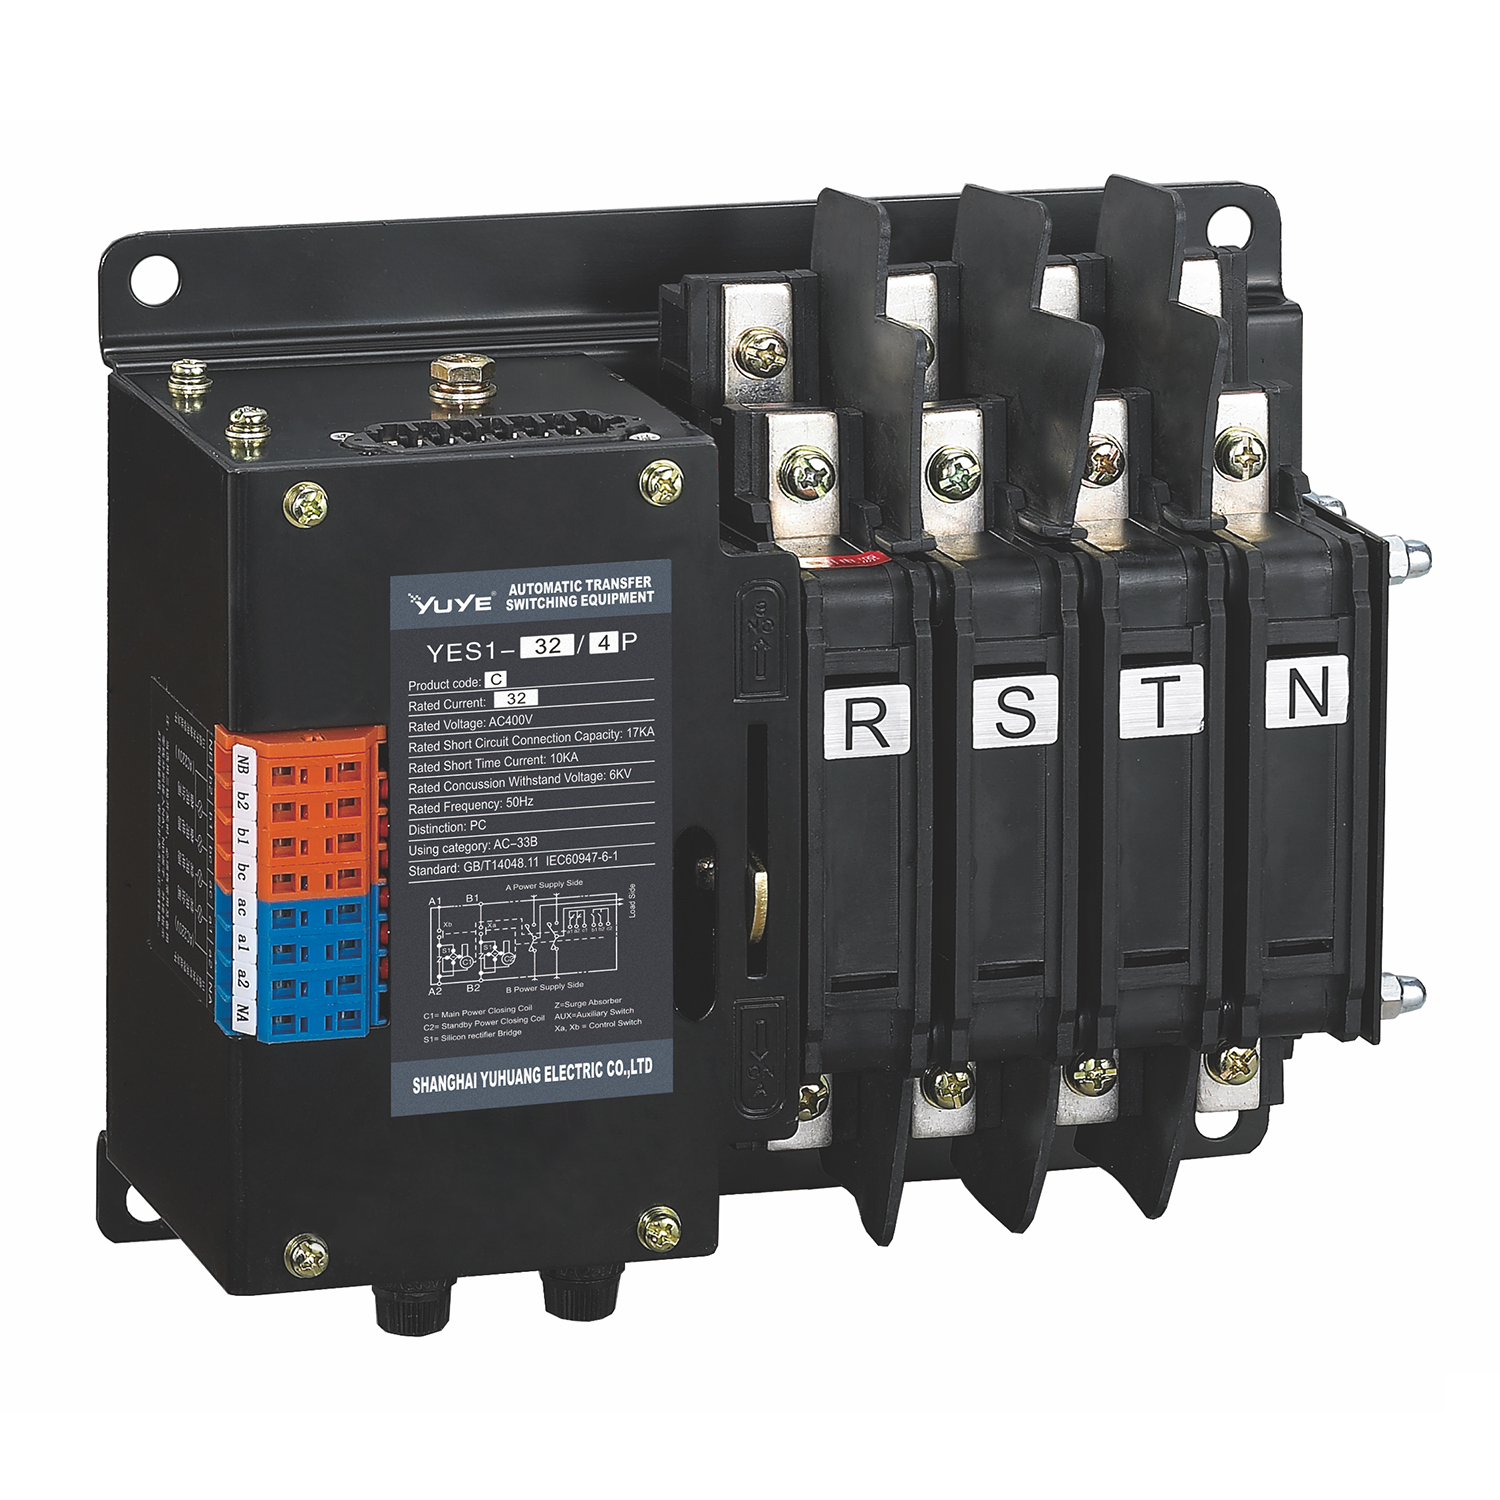 OEM/ODM China China Automatic Transfer Switch ATS with IEC60947-6-1